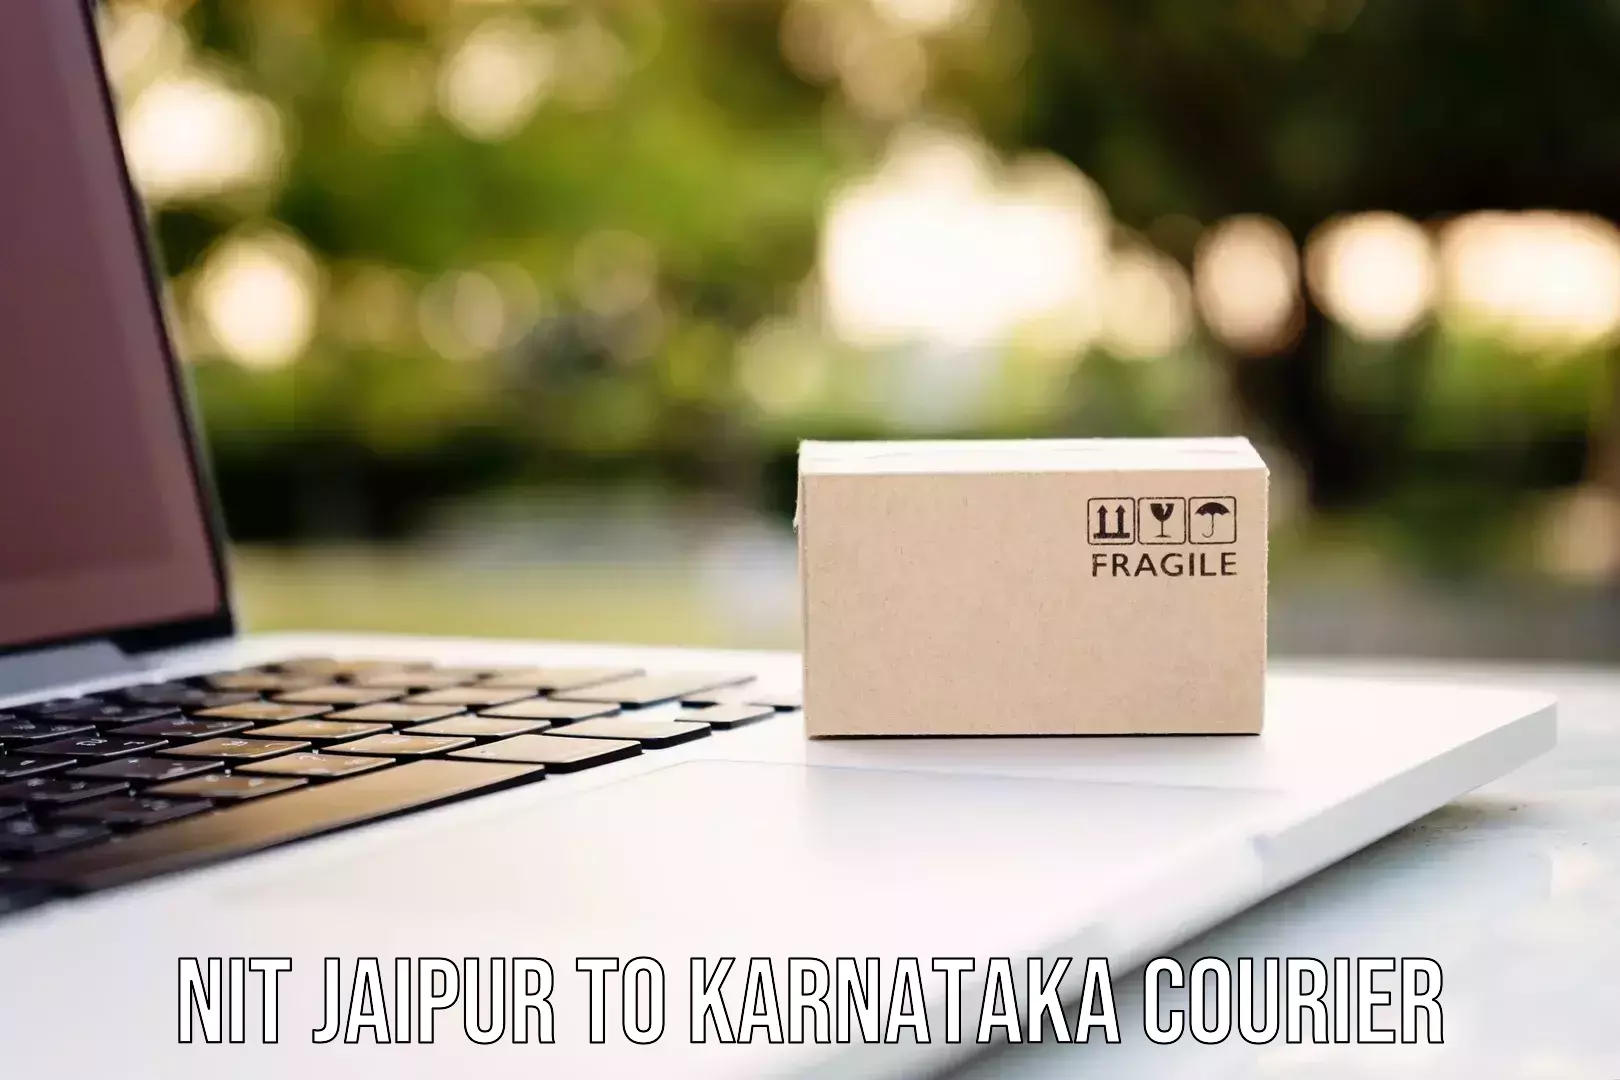 Business courier solutions NIT Jaipur to Laxmeshwar